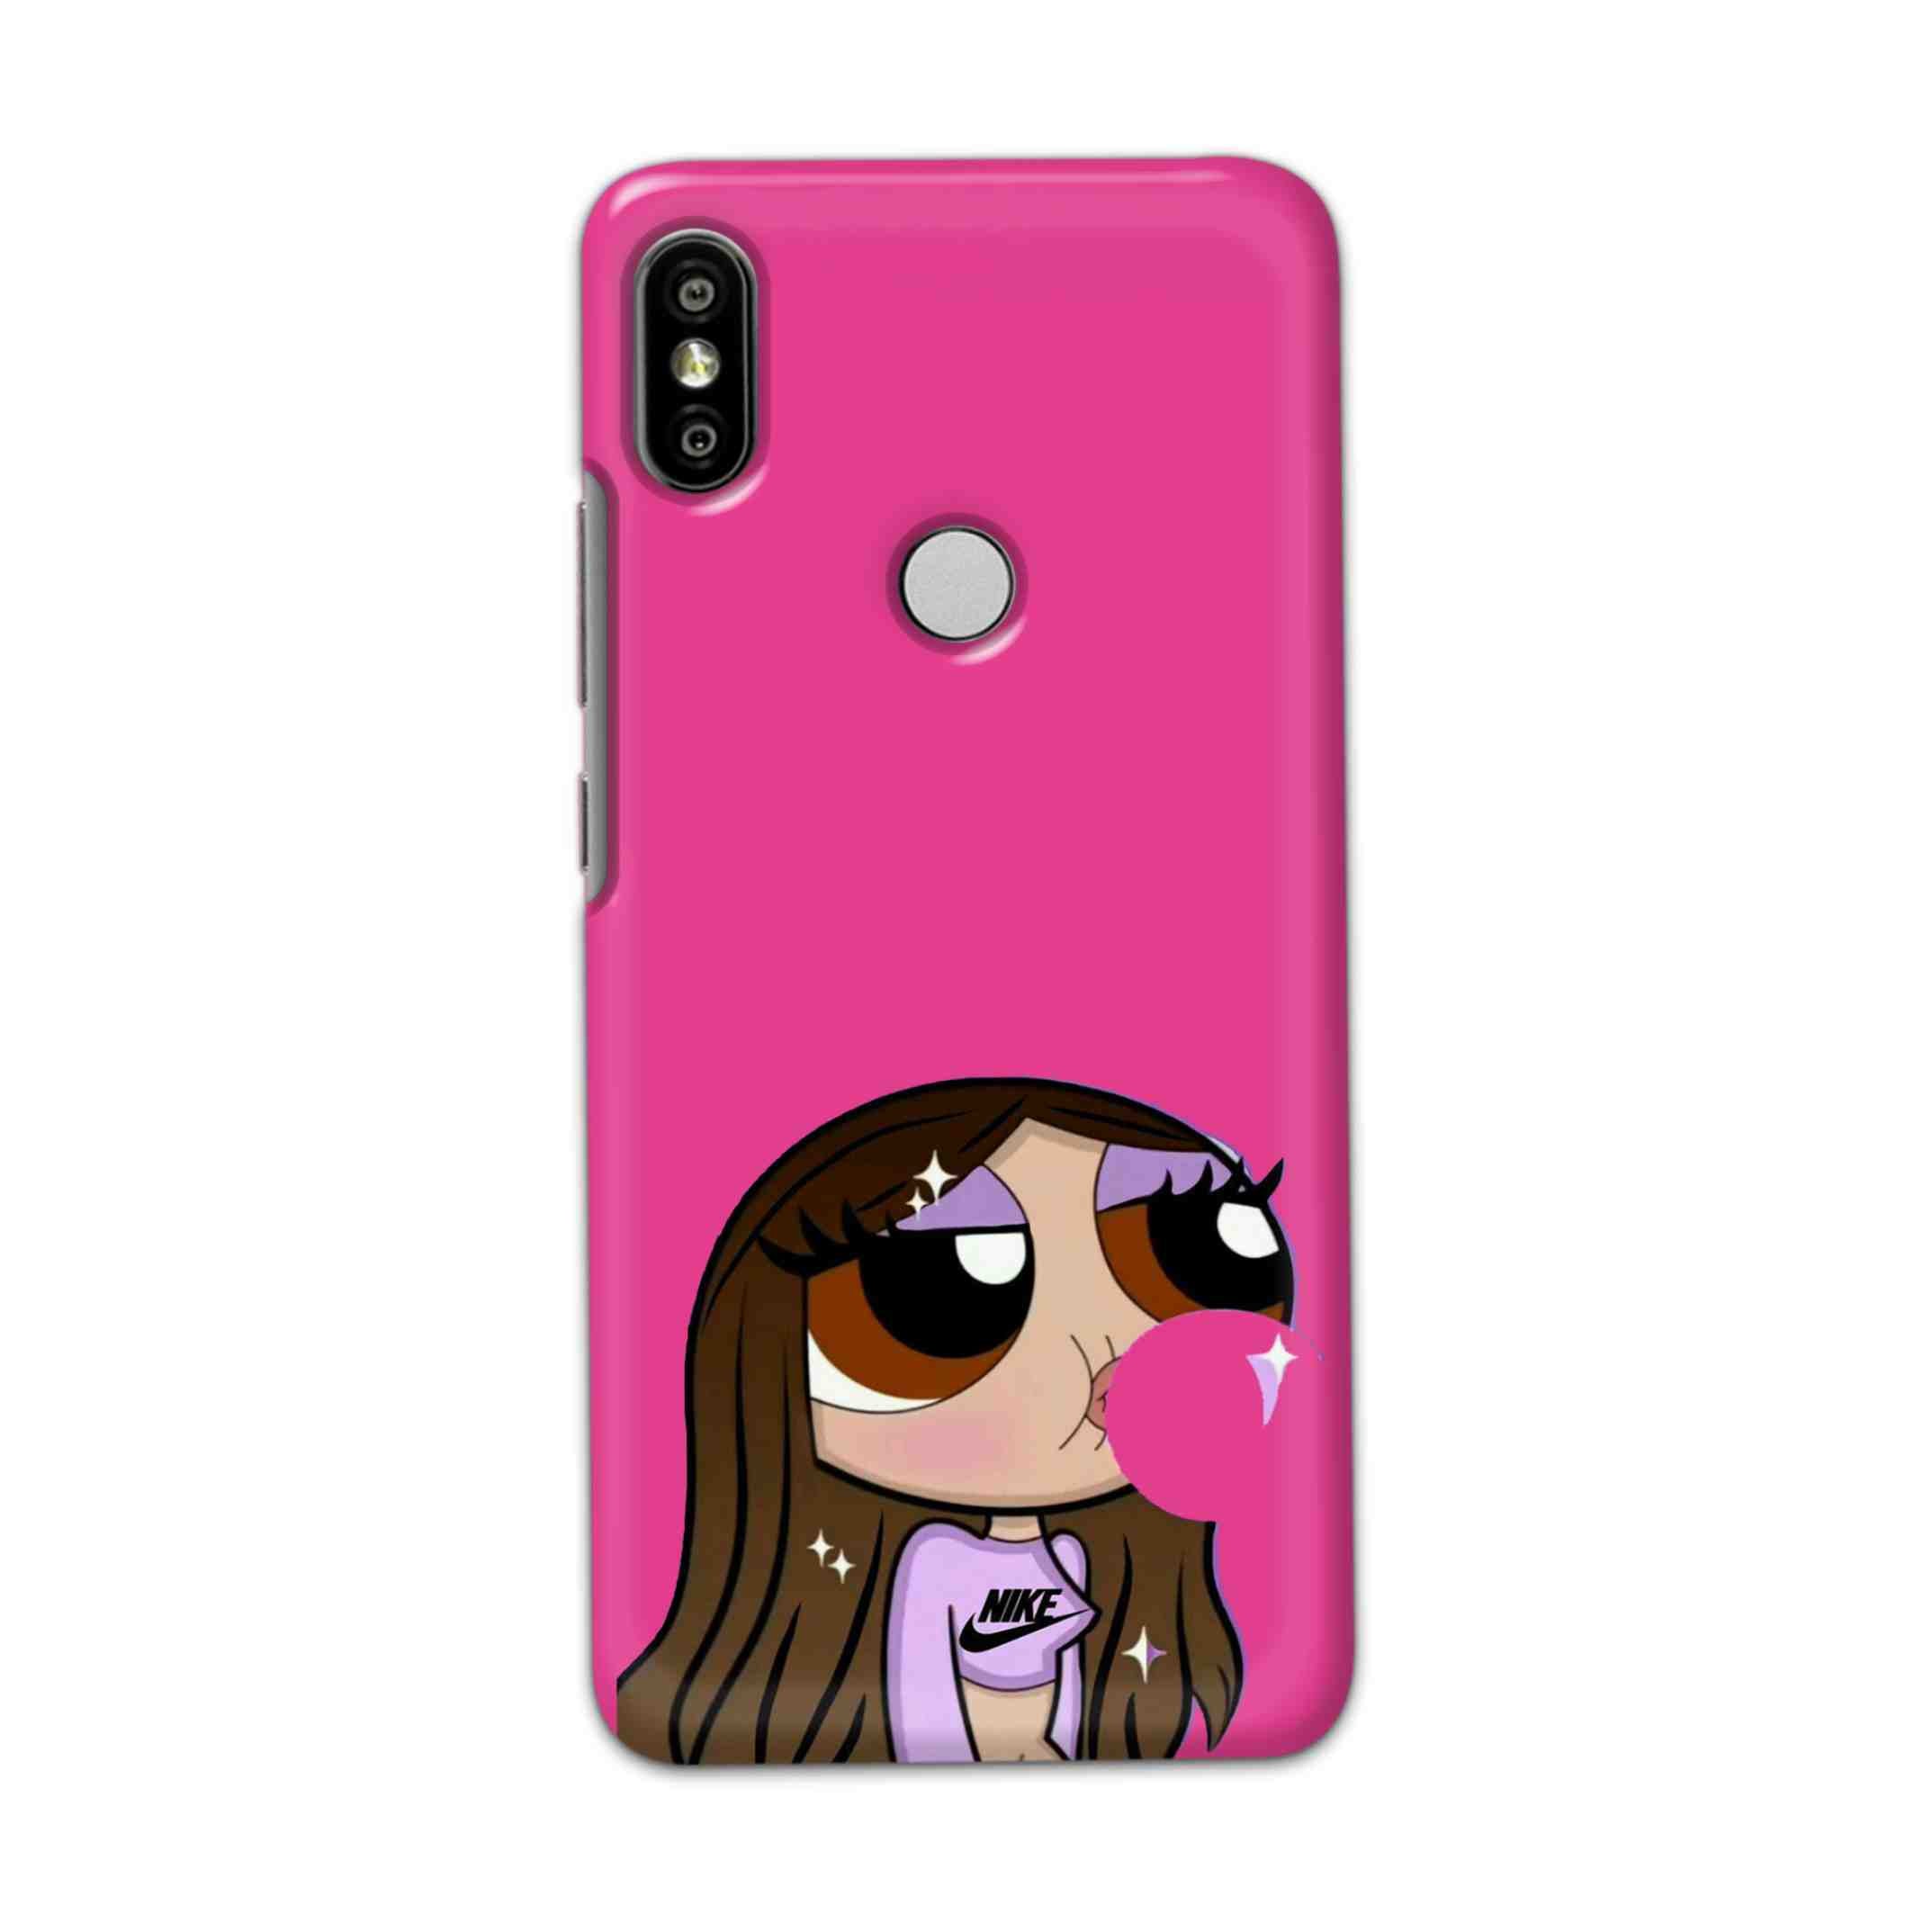 Buy Bubble Girl Hard Back Mobile Phone Case Cover For Redmi S2 / Y2 Online